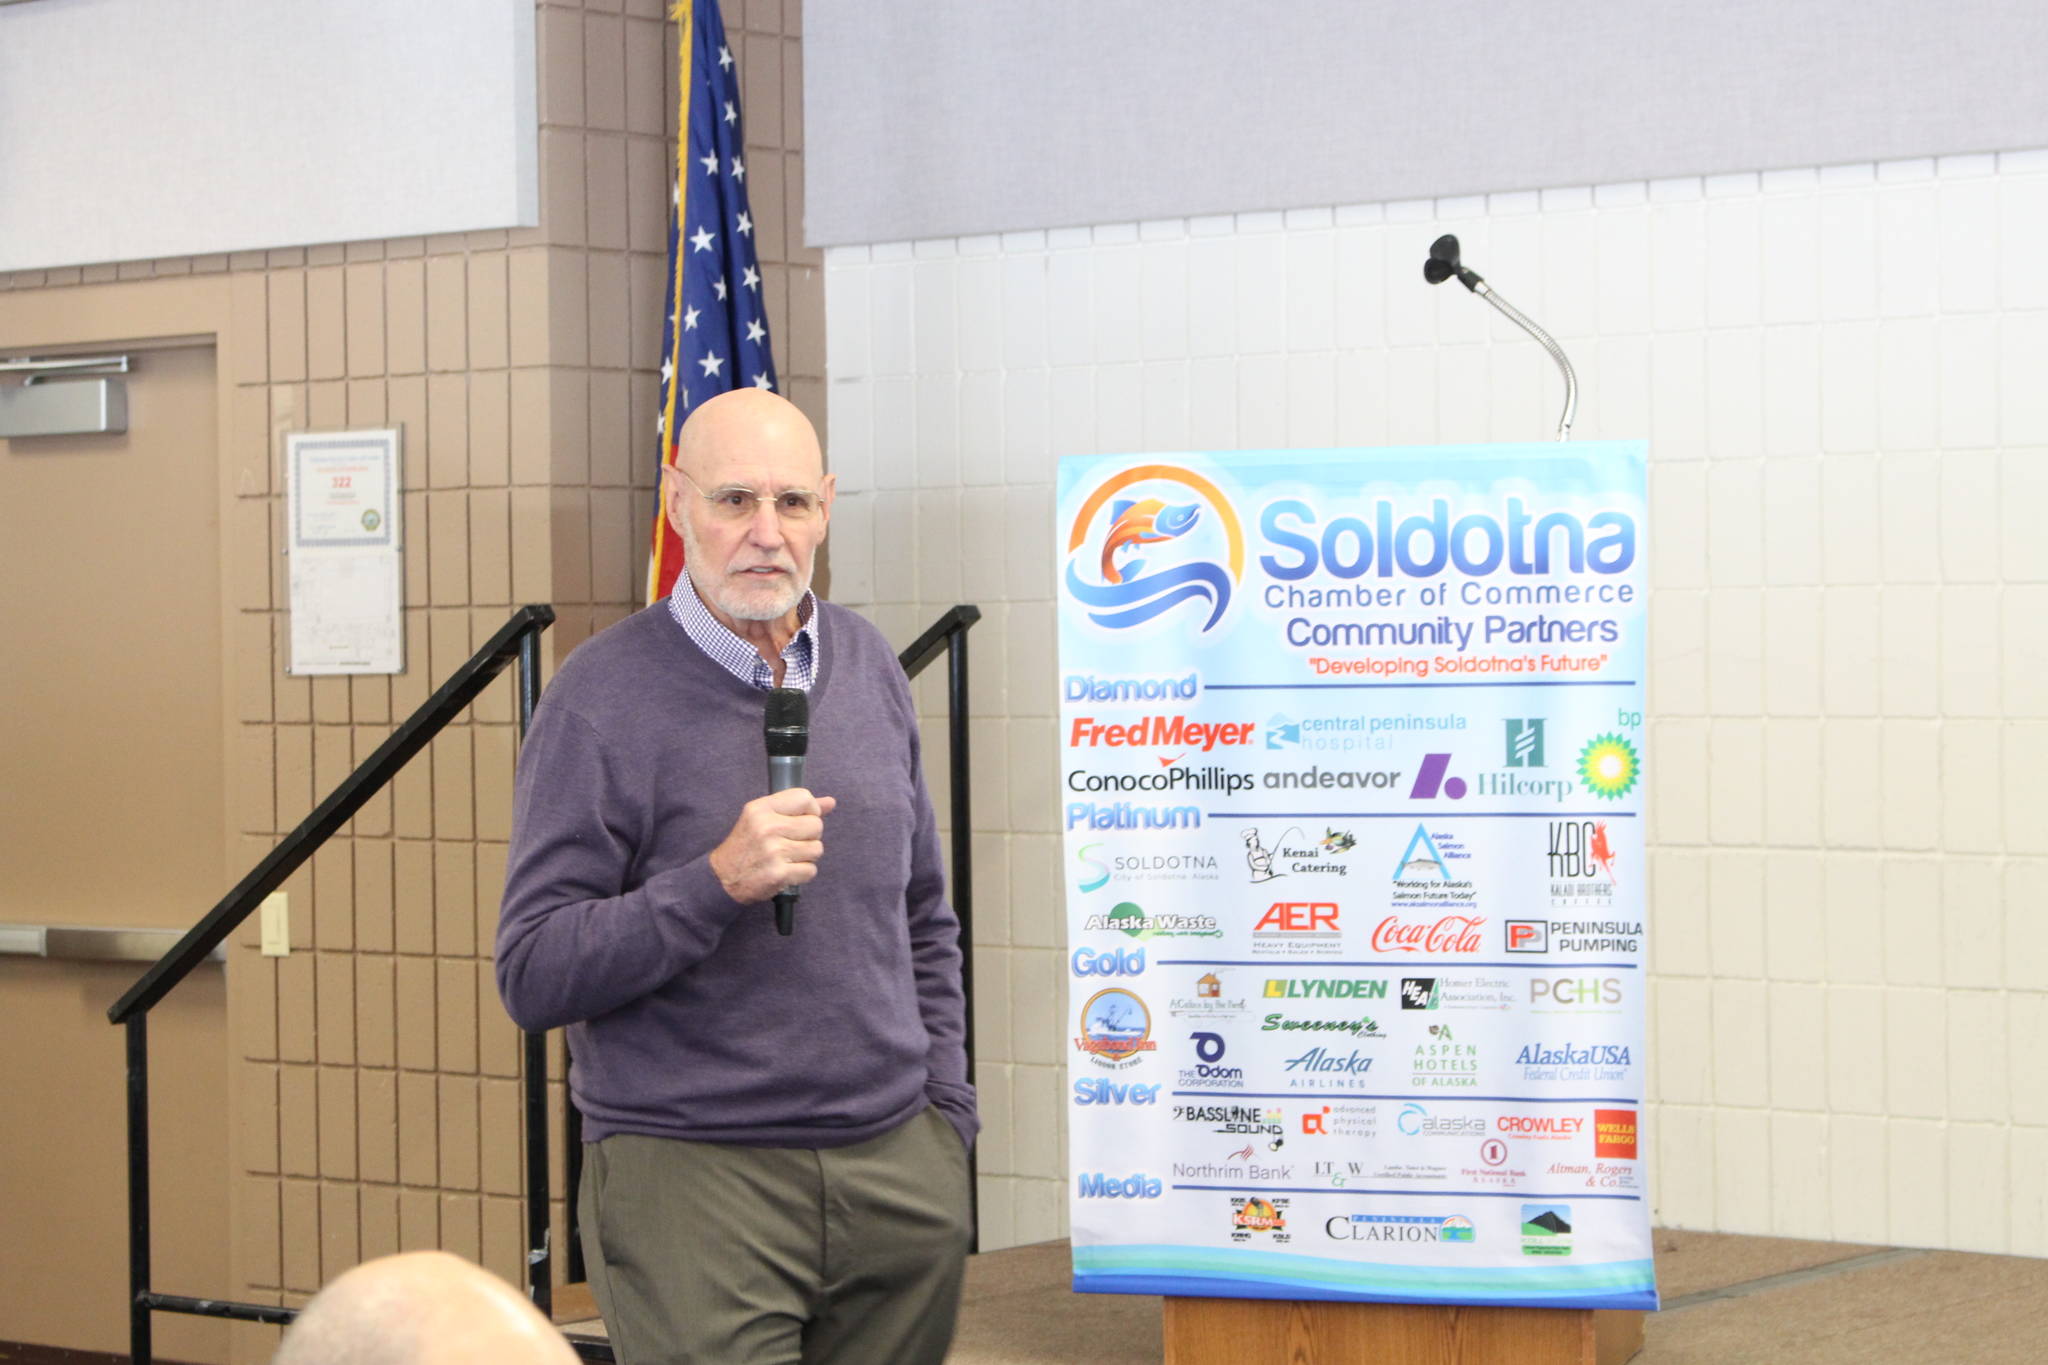 Mark Hamilton, vice president of external affairs for the Pebble Limited Partnership, speaks to members of the Kenai and Soldotna Chambers of Commerce at the Soldotna Regional Sports Complex in Soldotna, Alaska on March 11, 2020. (Photo by Brian Mazurek/Peninsula Clarion)